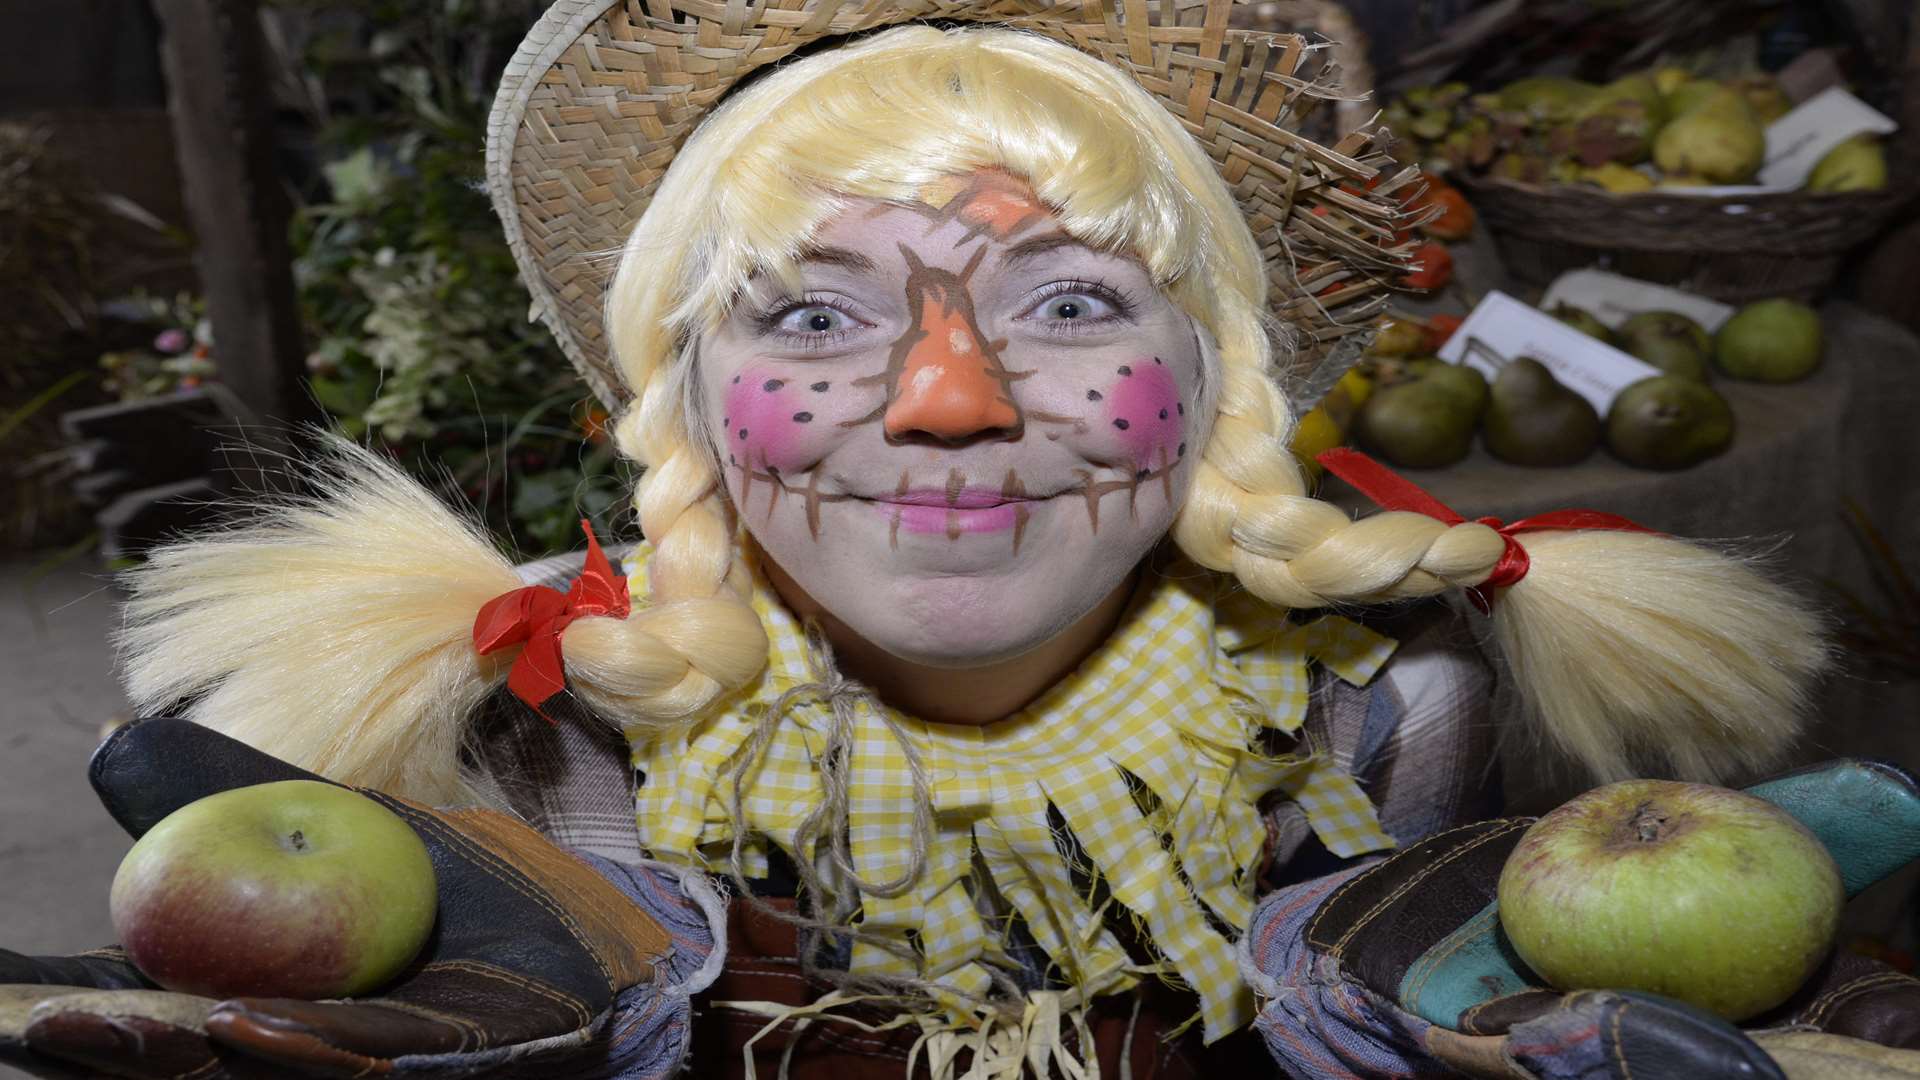 Sally the Scarecrow, Kelly Burrows, at last year's National Apple Festival